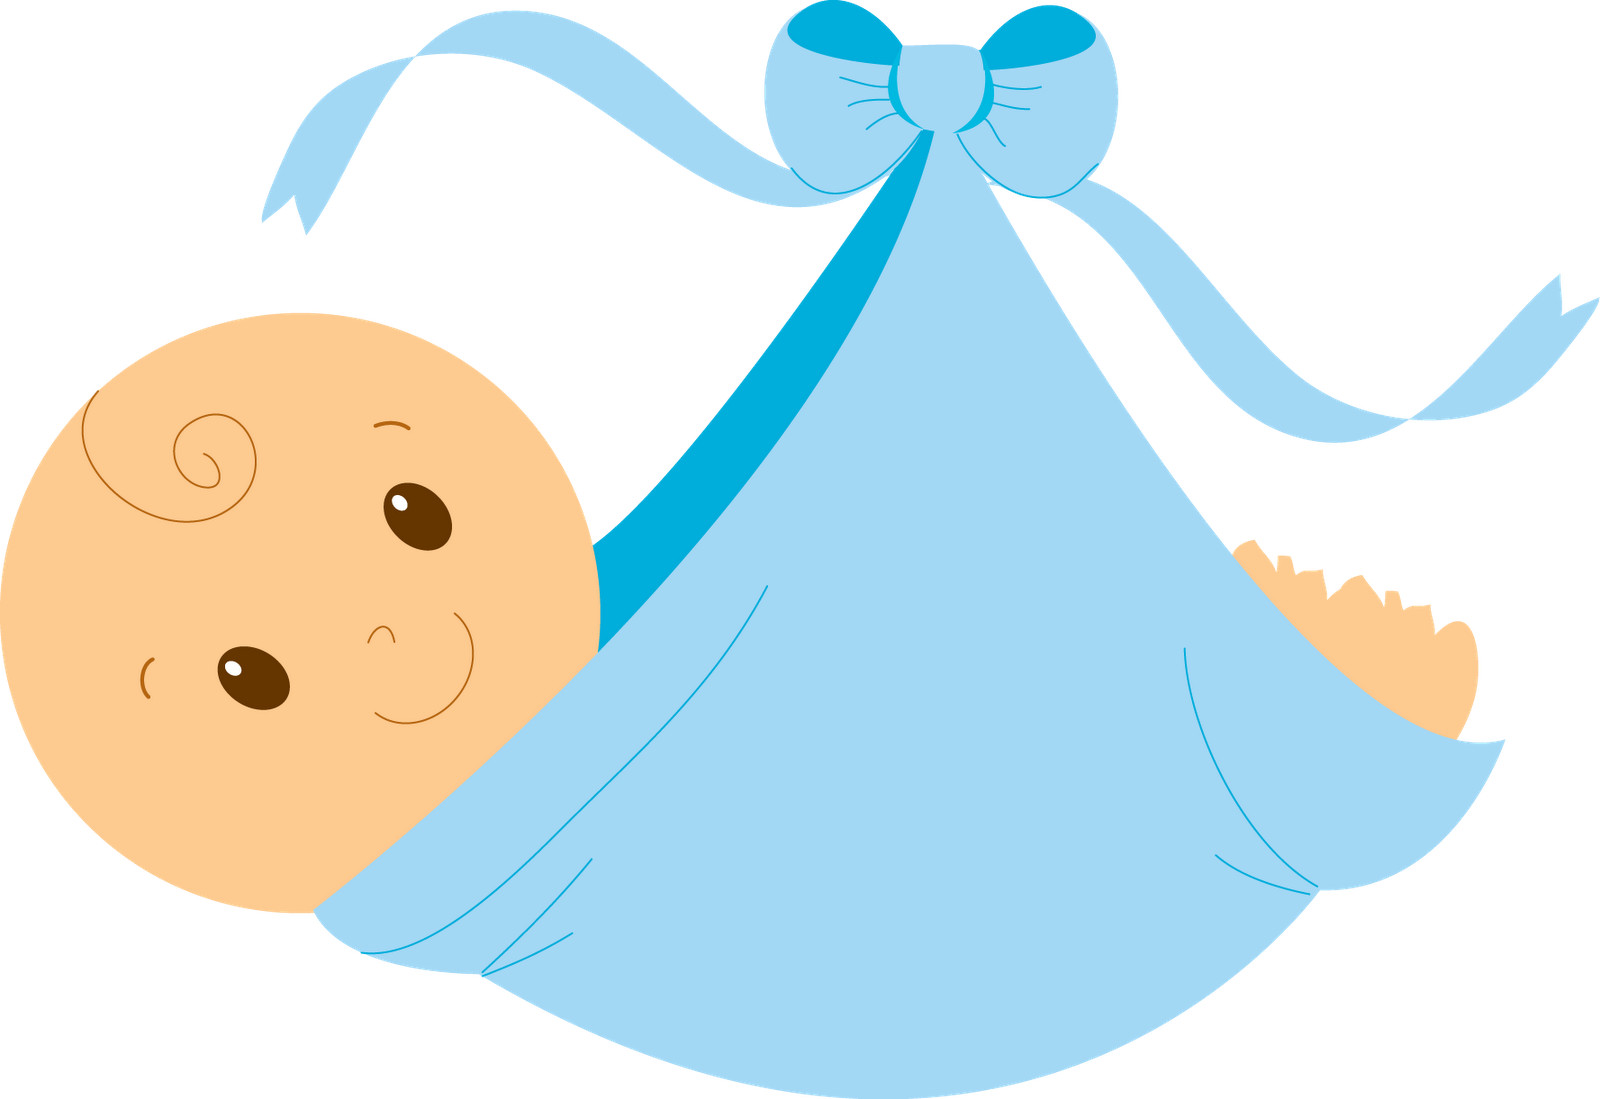 Free Baby Shower Clip Art For Invitations - ClipArt Best